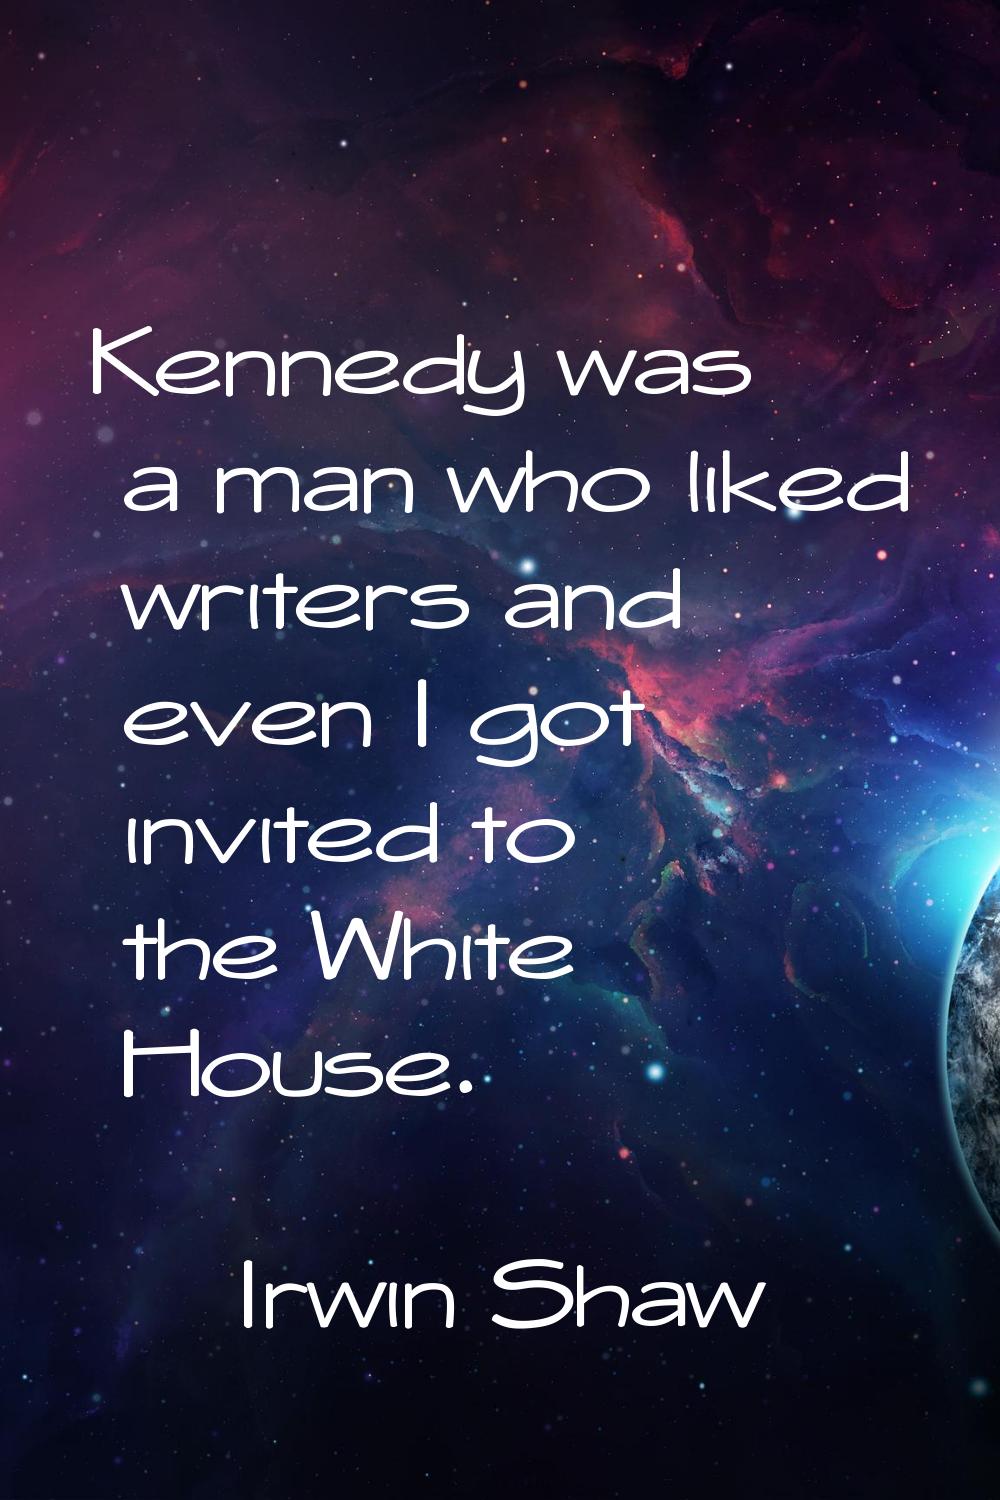 Kennedy was a man who liked writers and even I got invited to the White House.